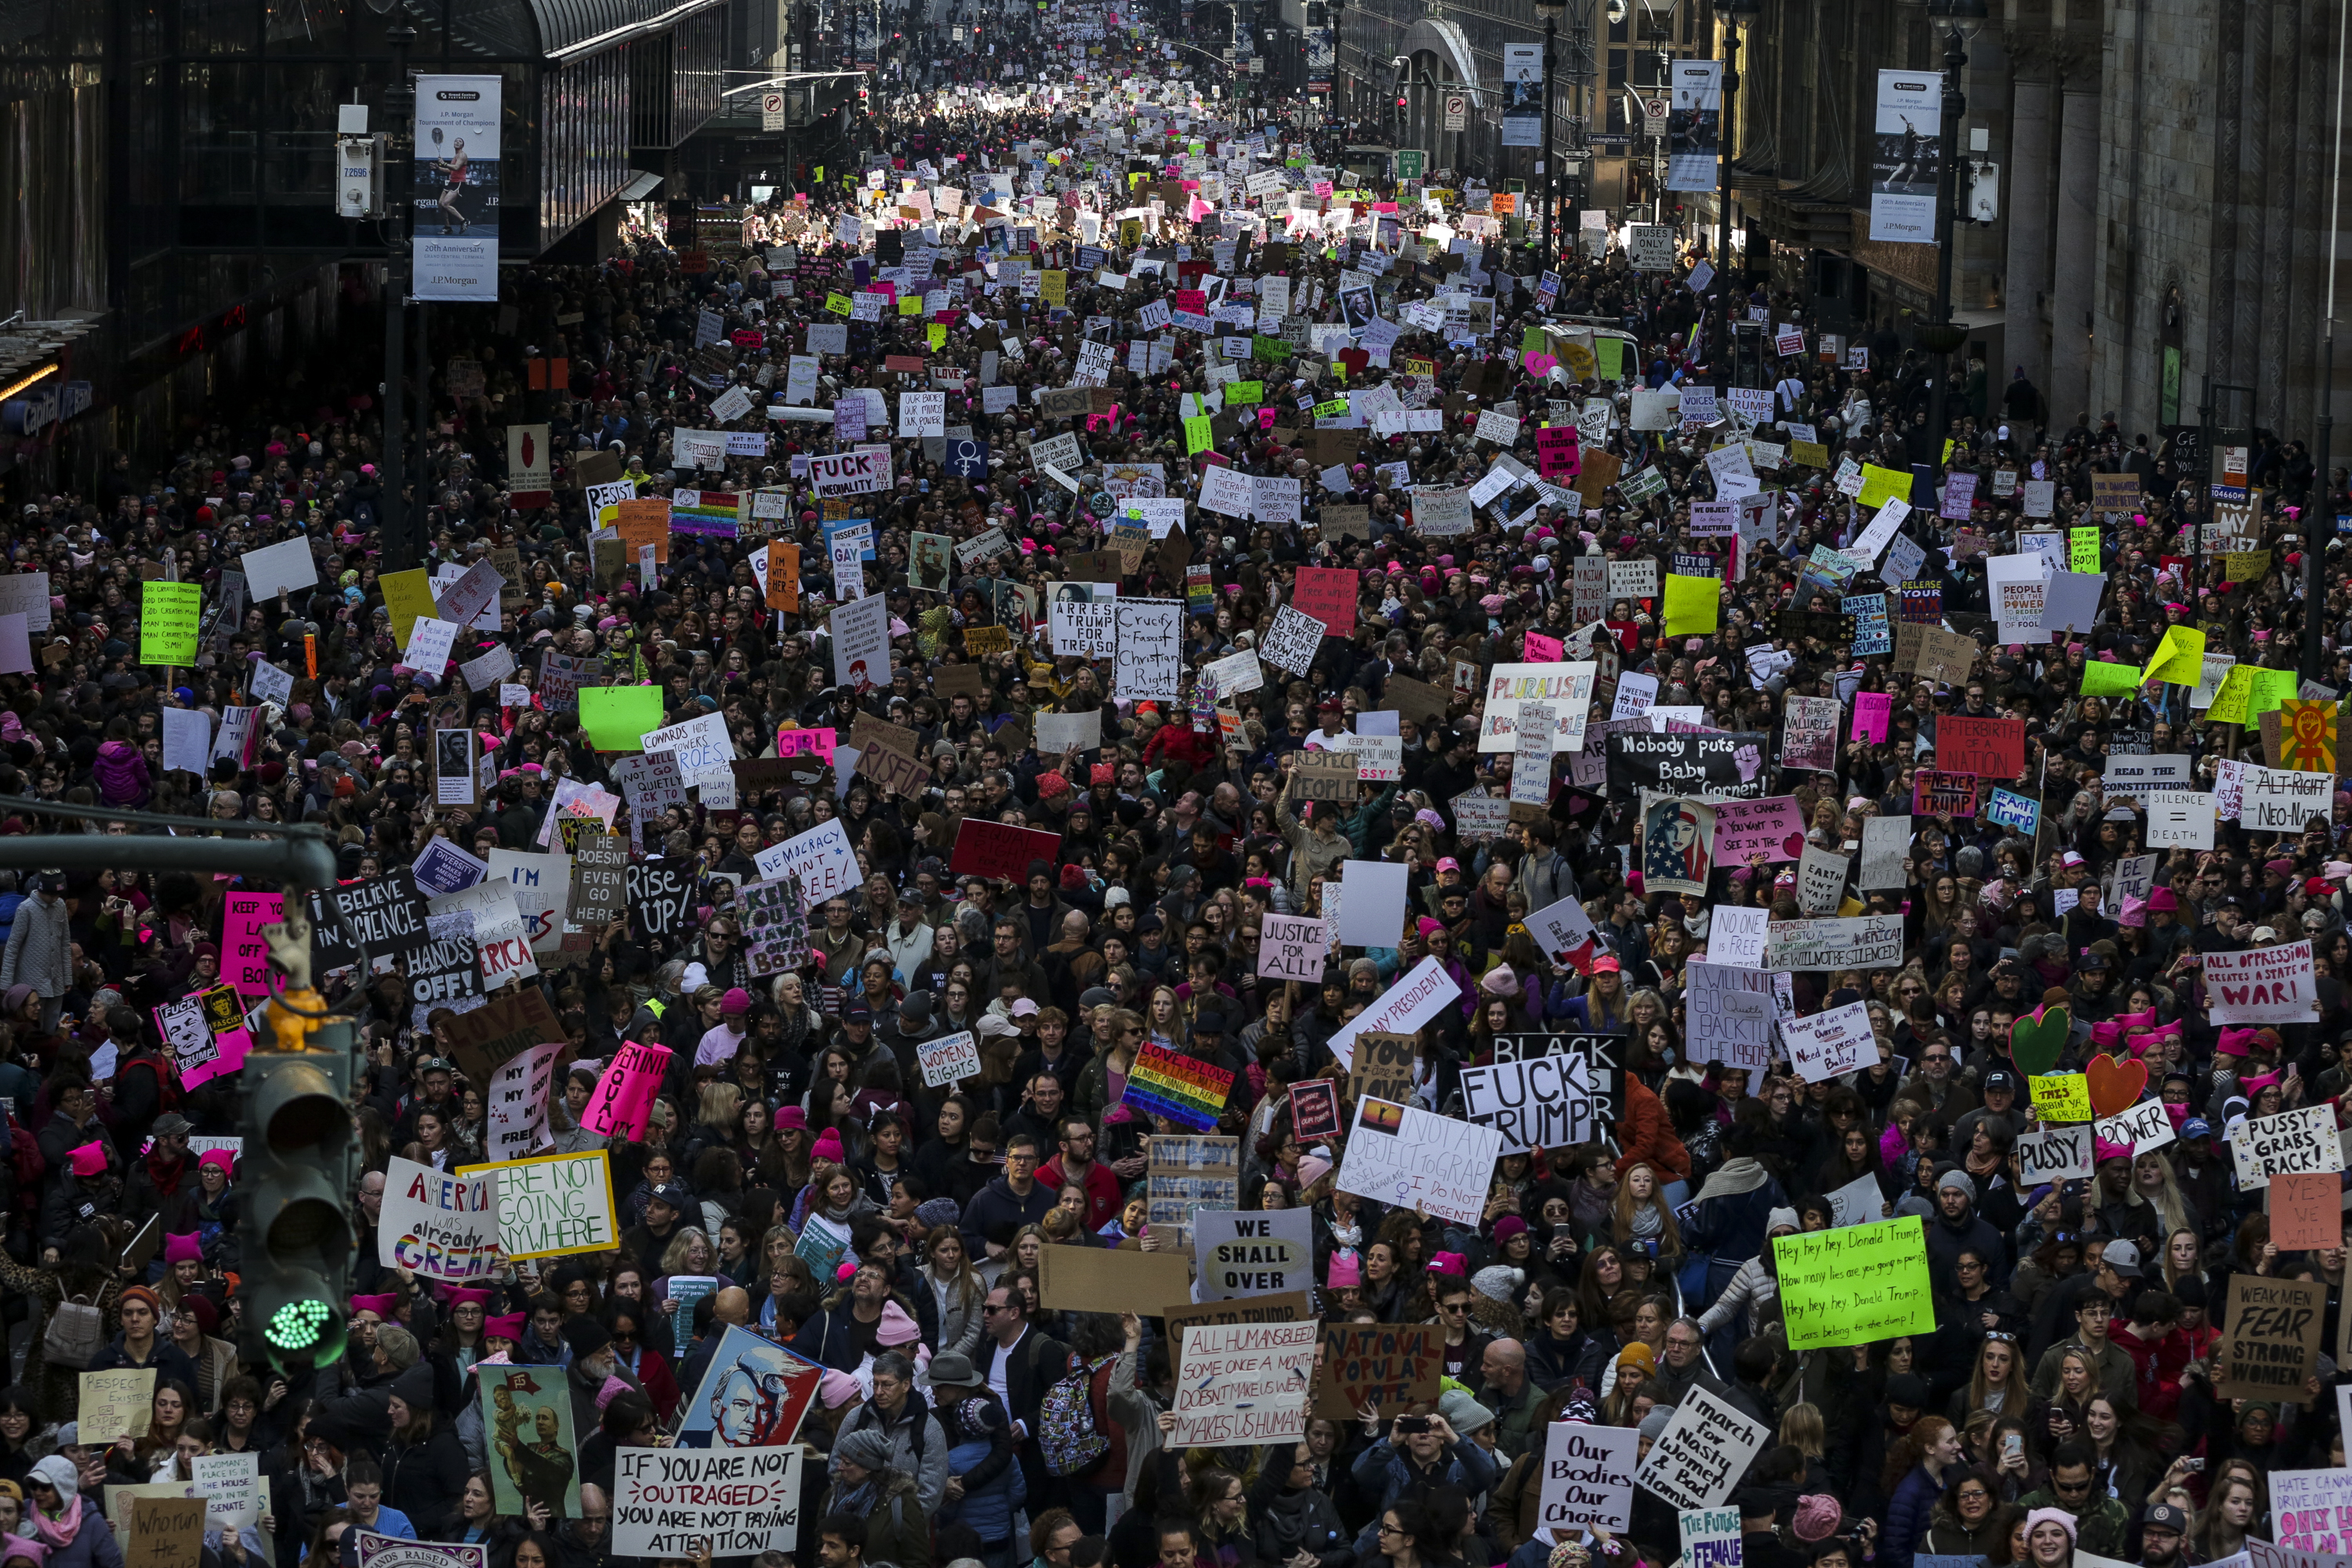 Demonstrators hold signs and march toward Trump Tower on Jan. 21, 2017. (Jeenah Moon—Bloomberg/Getty Images)